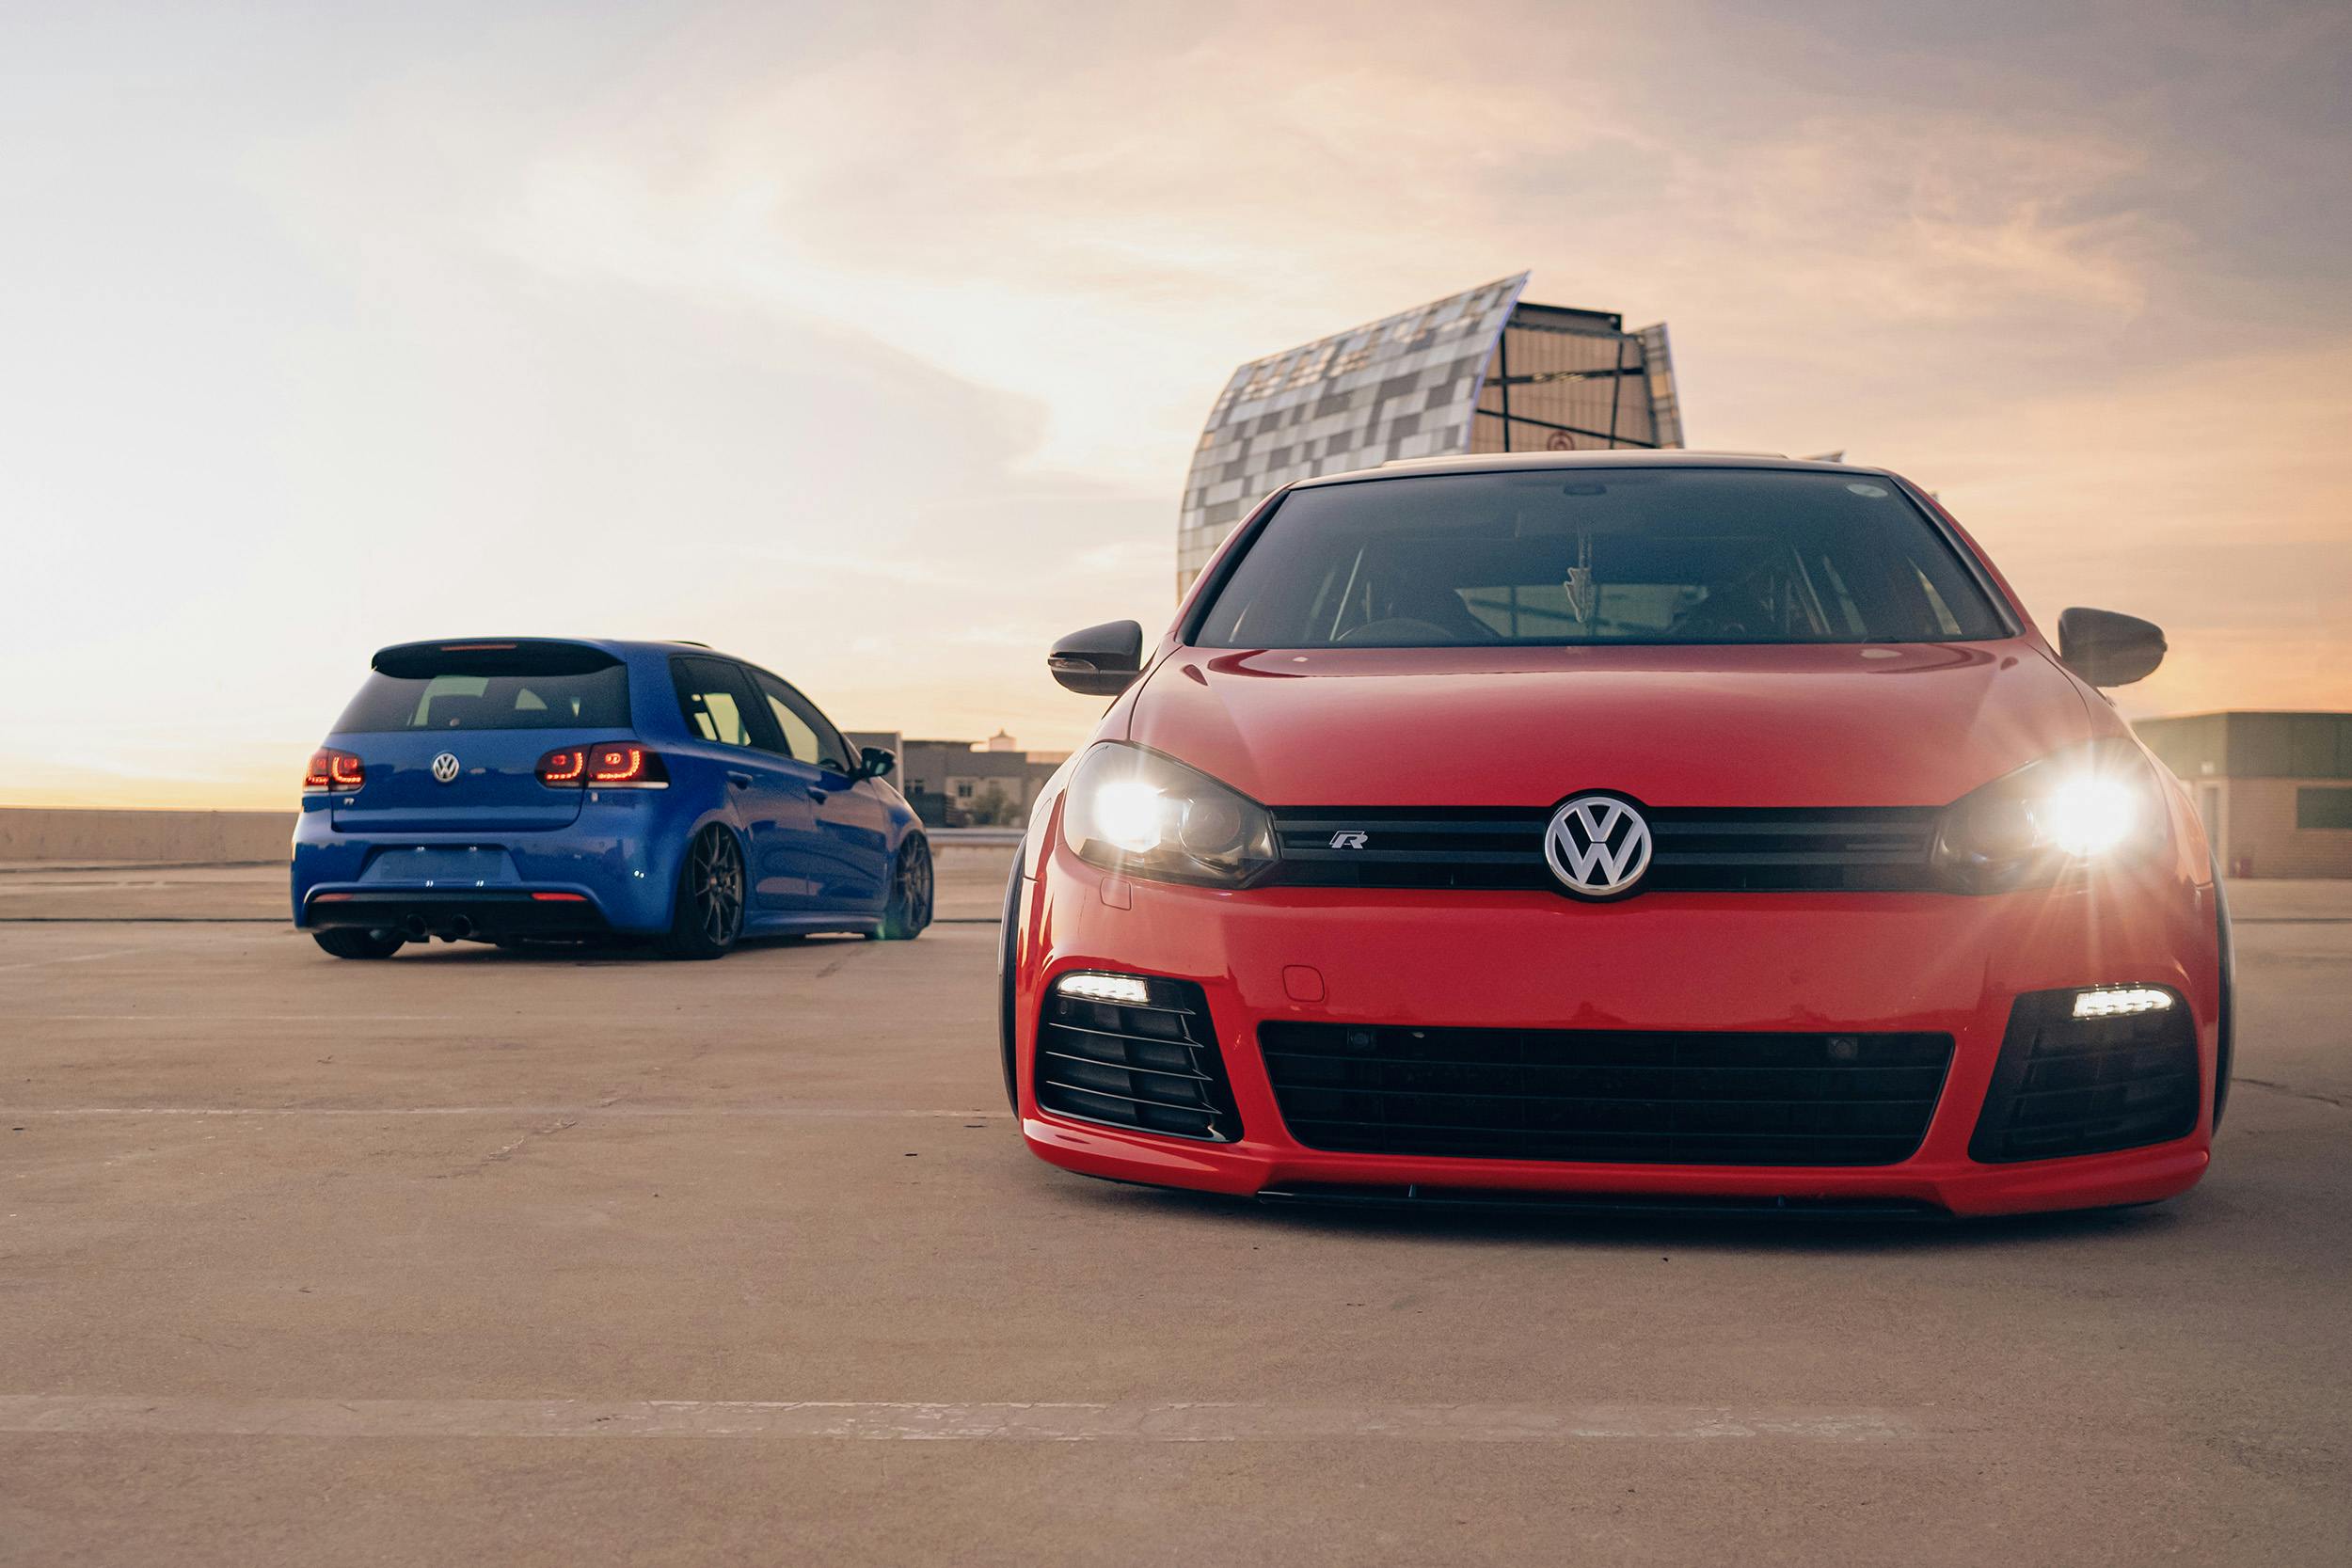 Air Lift Performance Around The World South Africa - VW Golf R dual front